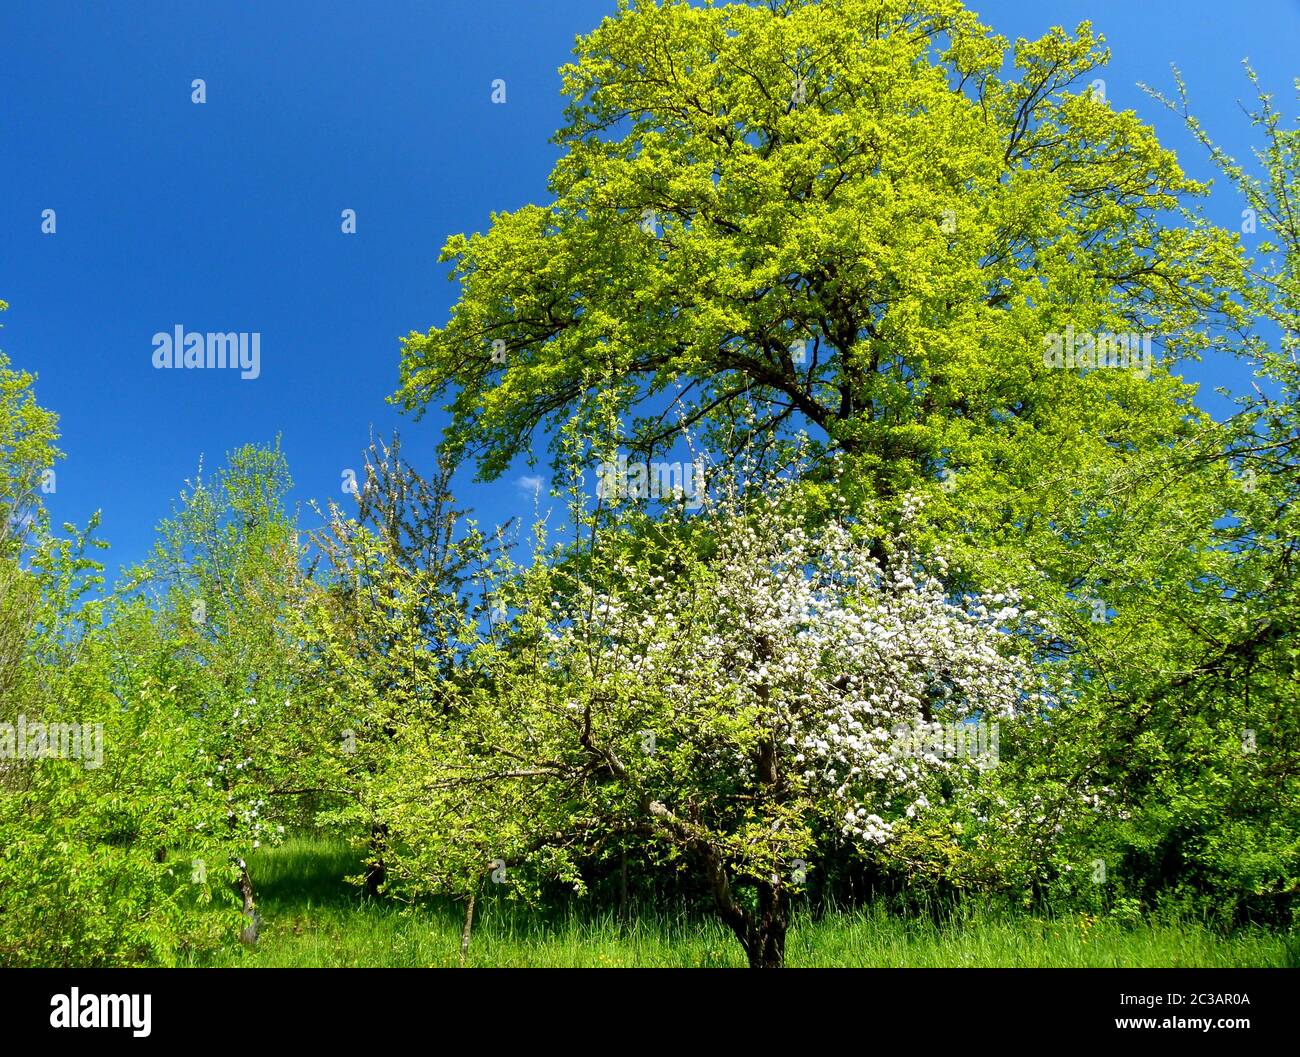 Tree with light green young foliage against a blue sky Stock Photo